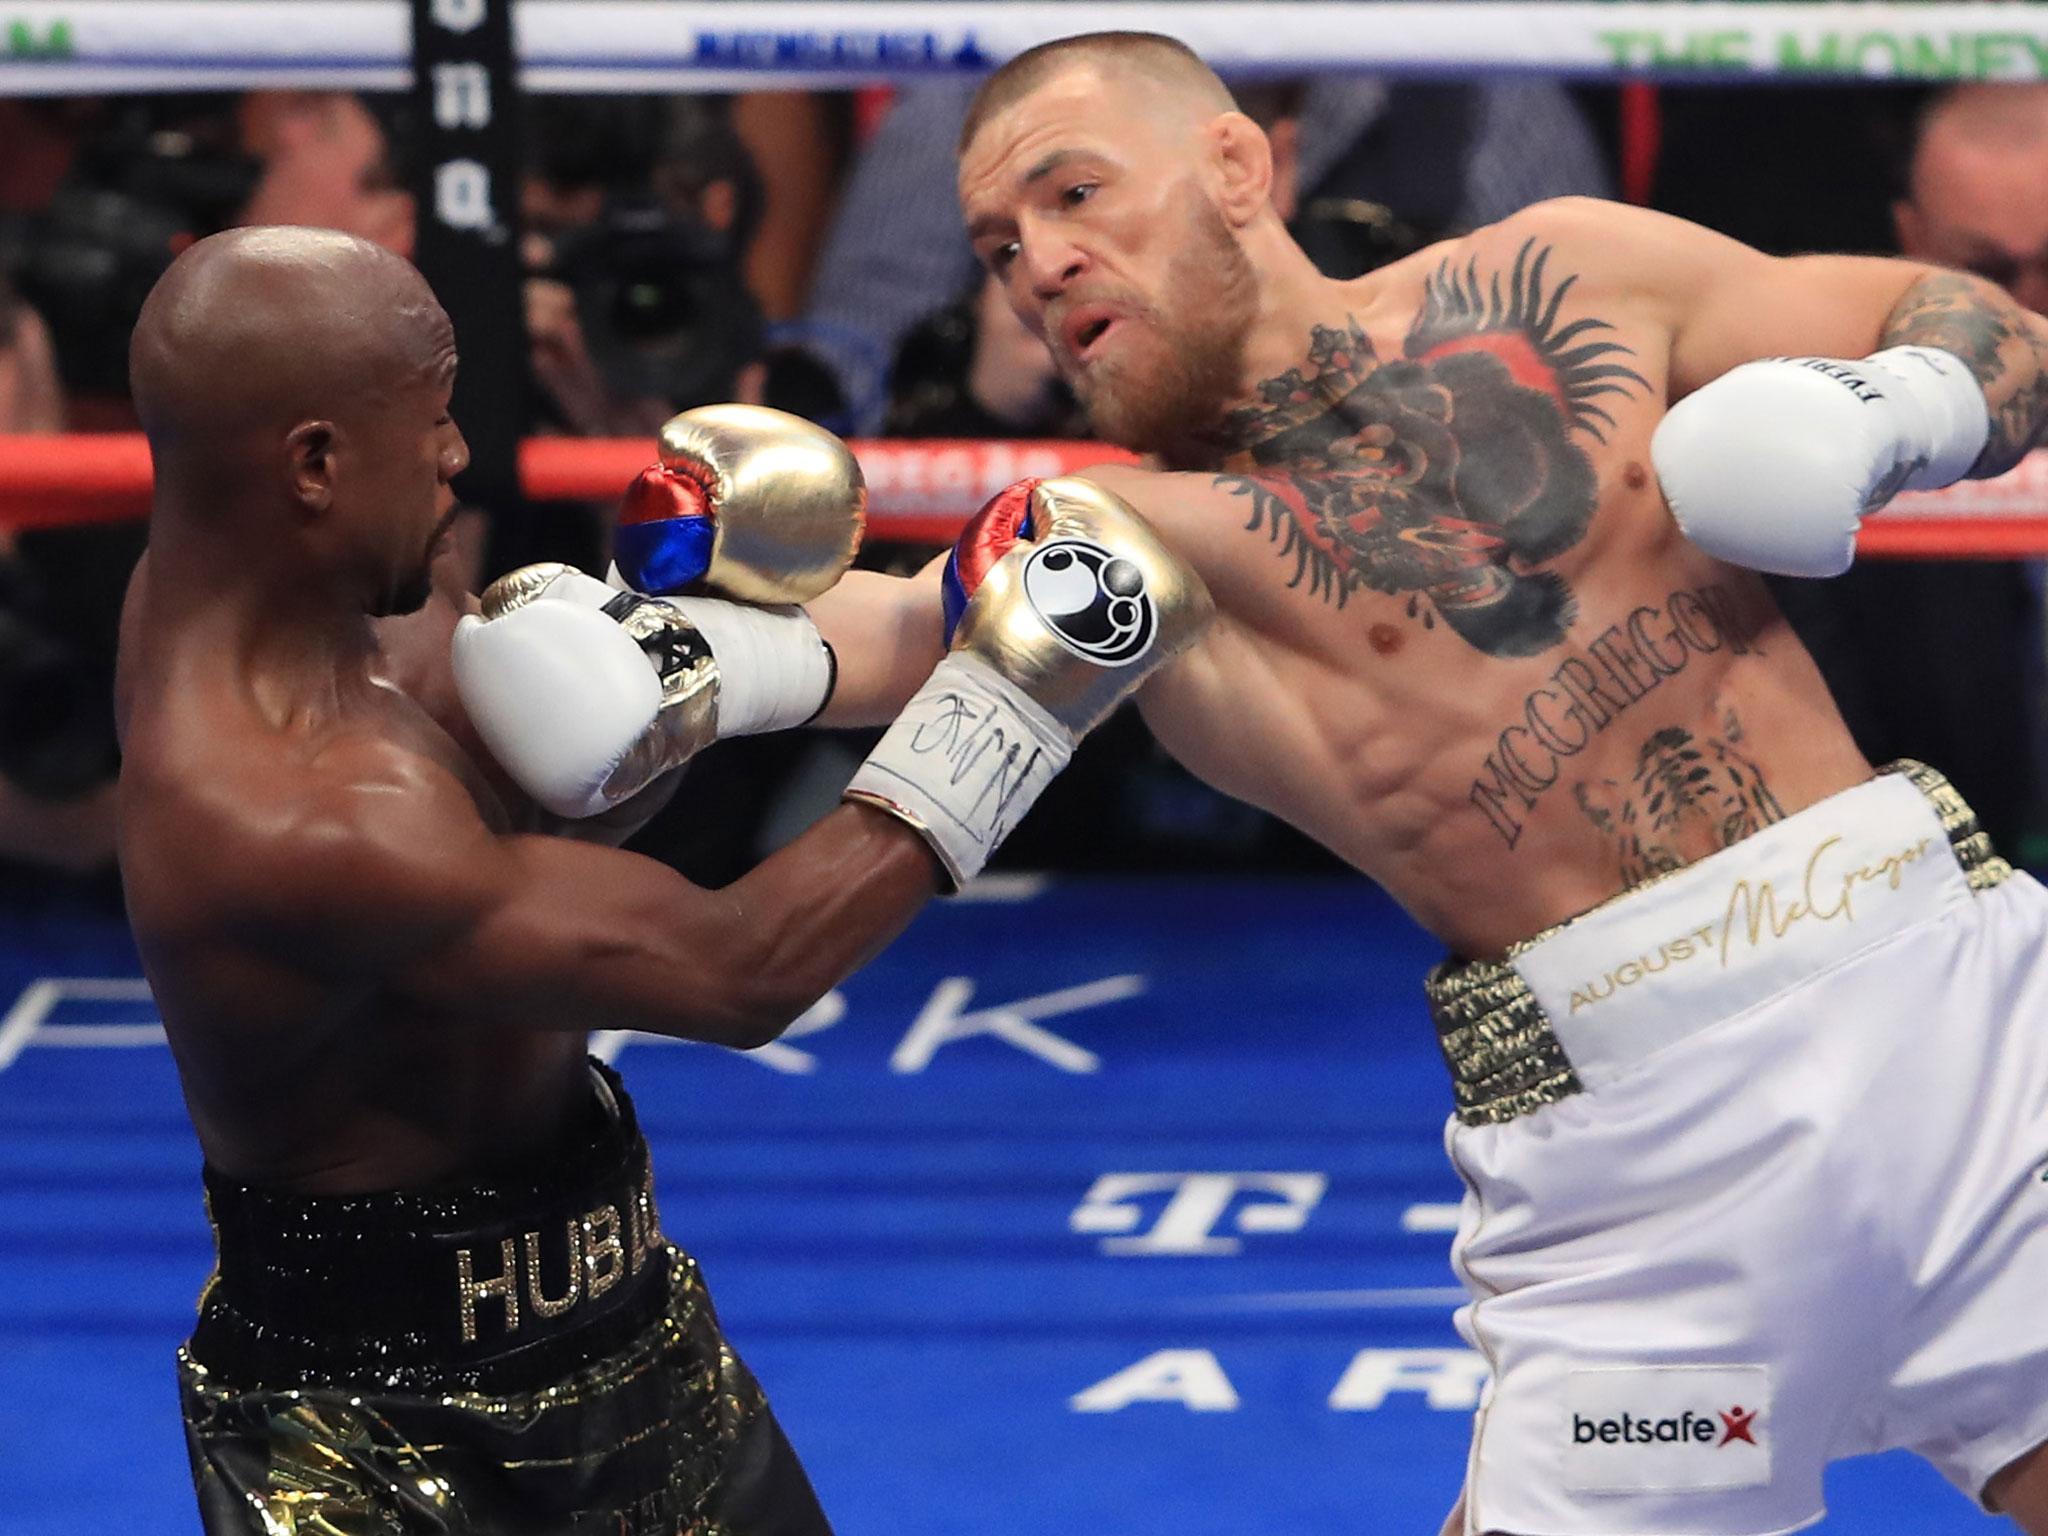 Conor McGregor started well against Floyd Mayweather before fading